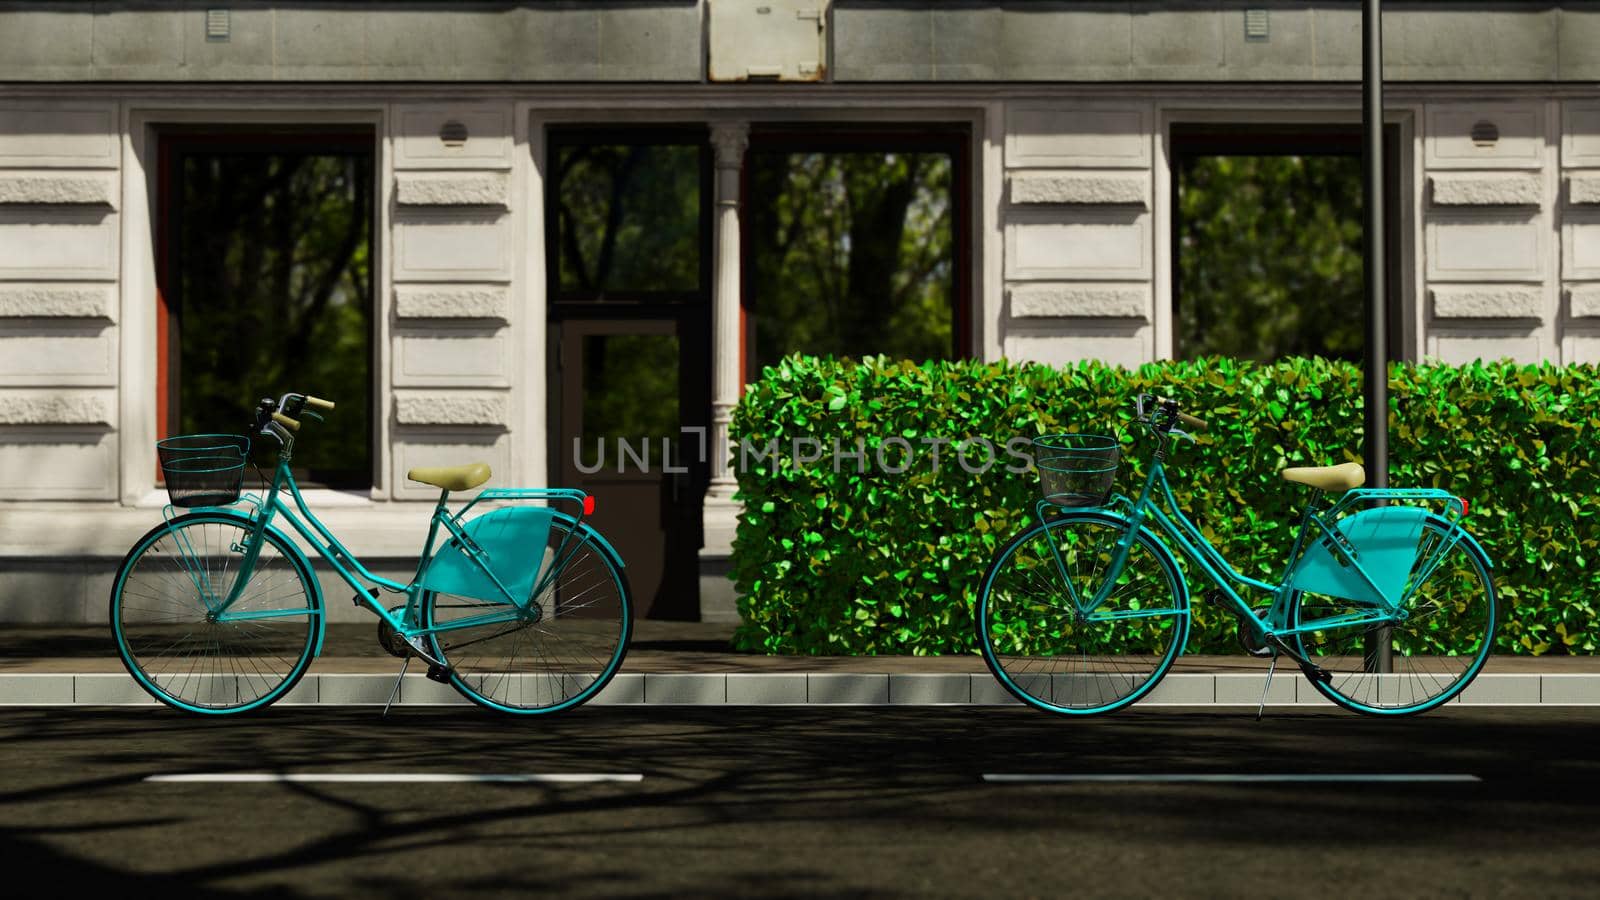 3D illustration Background for advertising and wallpaper in festival and Car Free Day scene. 3D rendering in decorative concept.